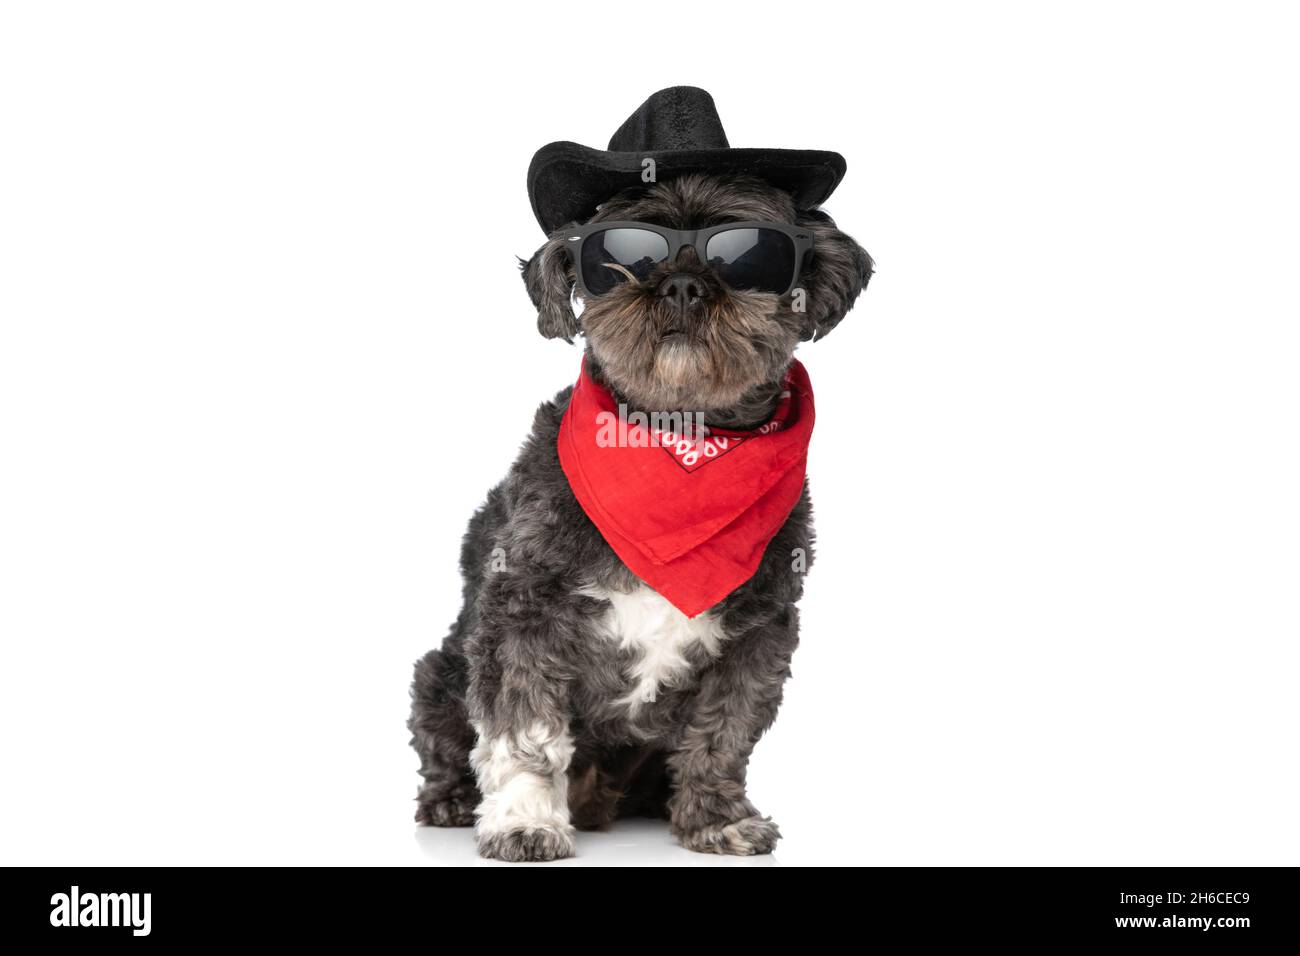 cool black dog wearing sunglasses, a cowboy hat and a bandana in a fashion pose Stock Photo